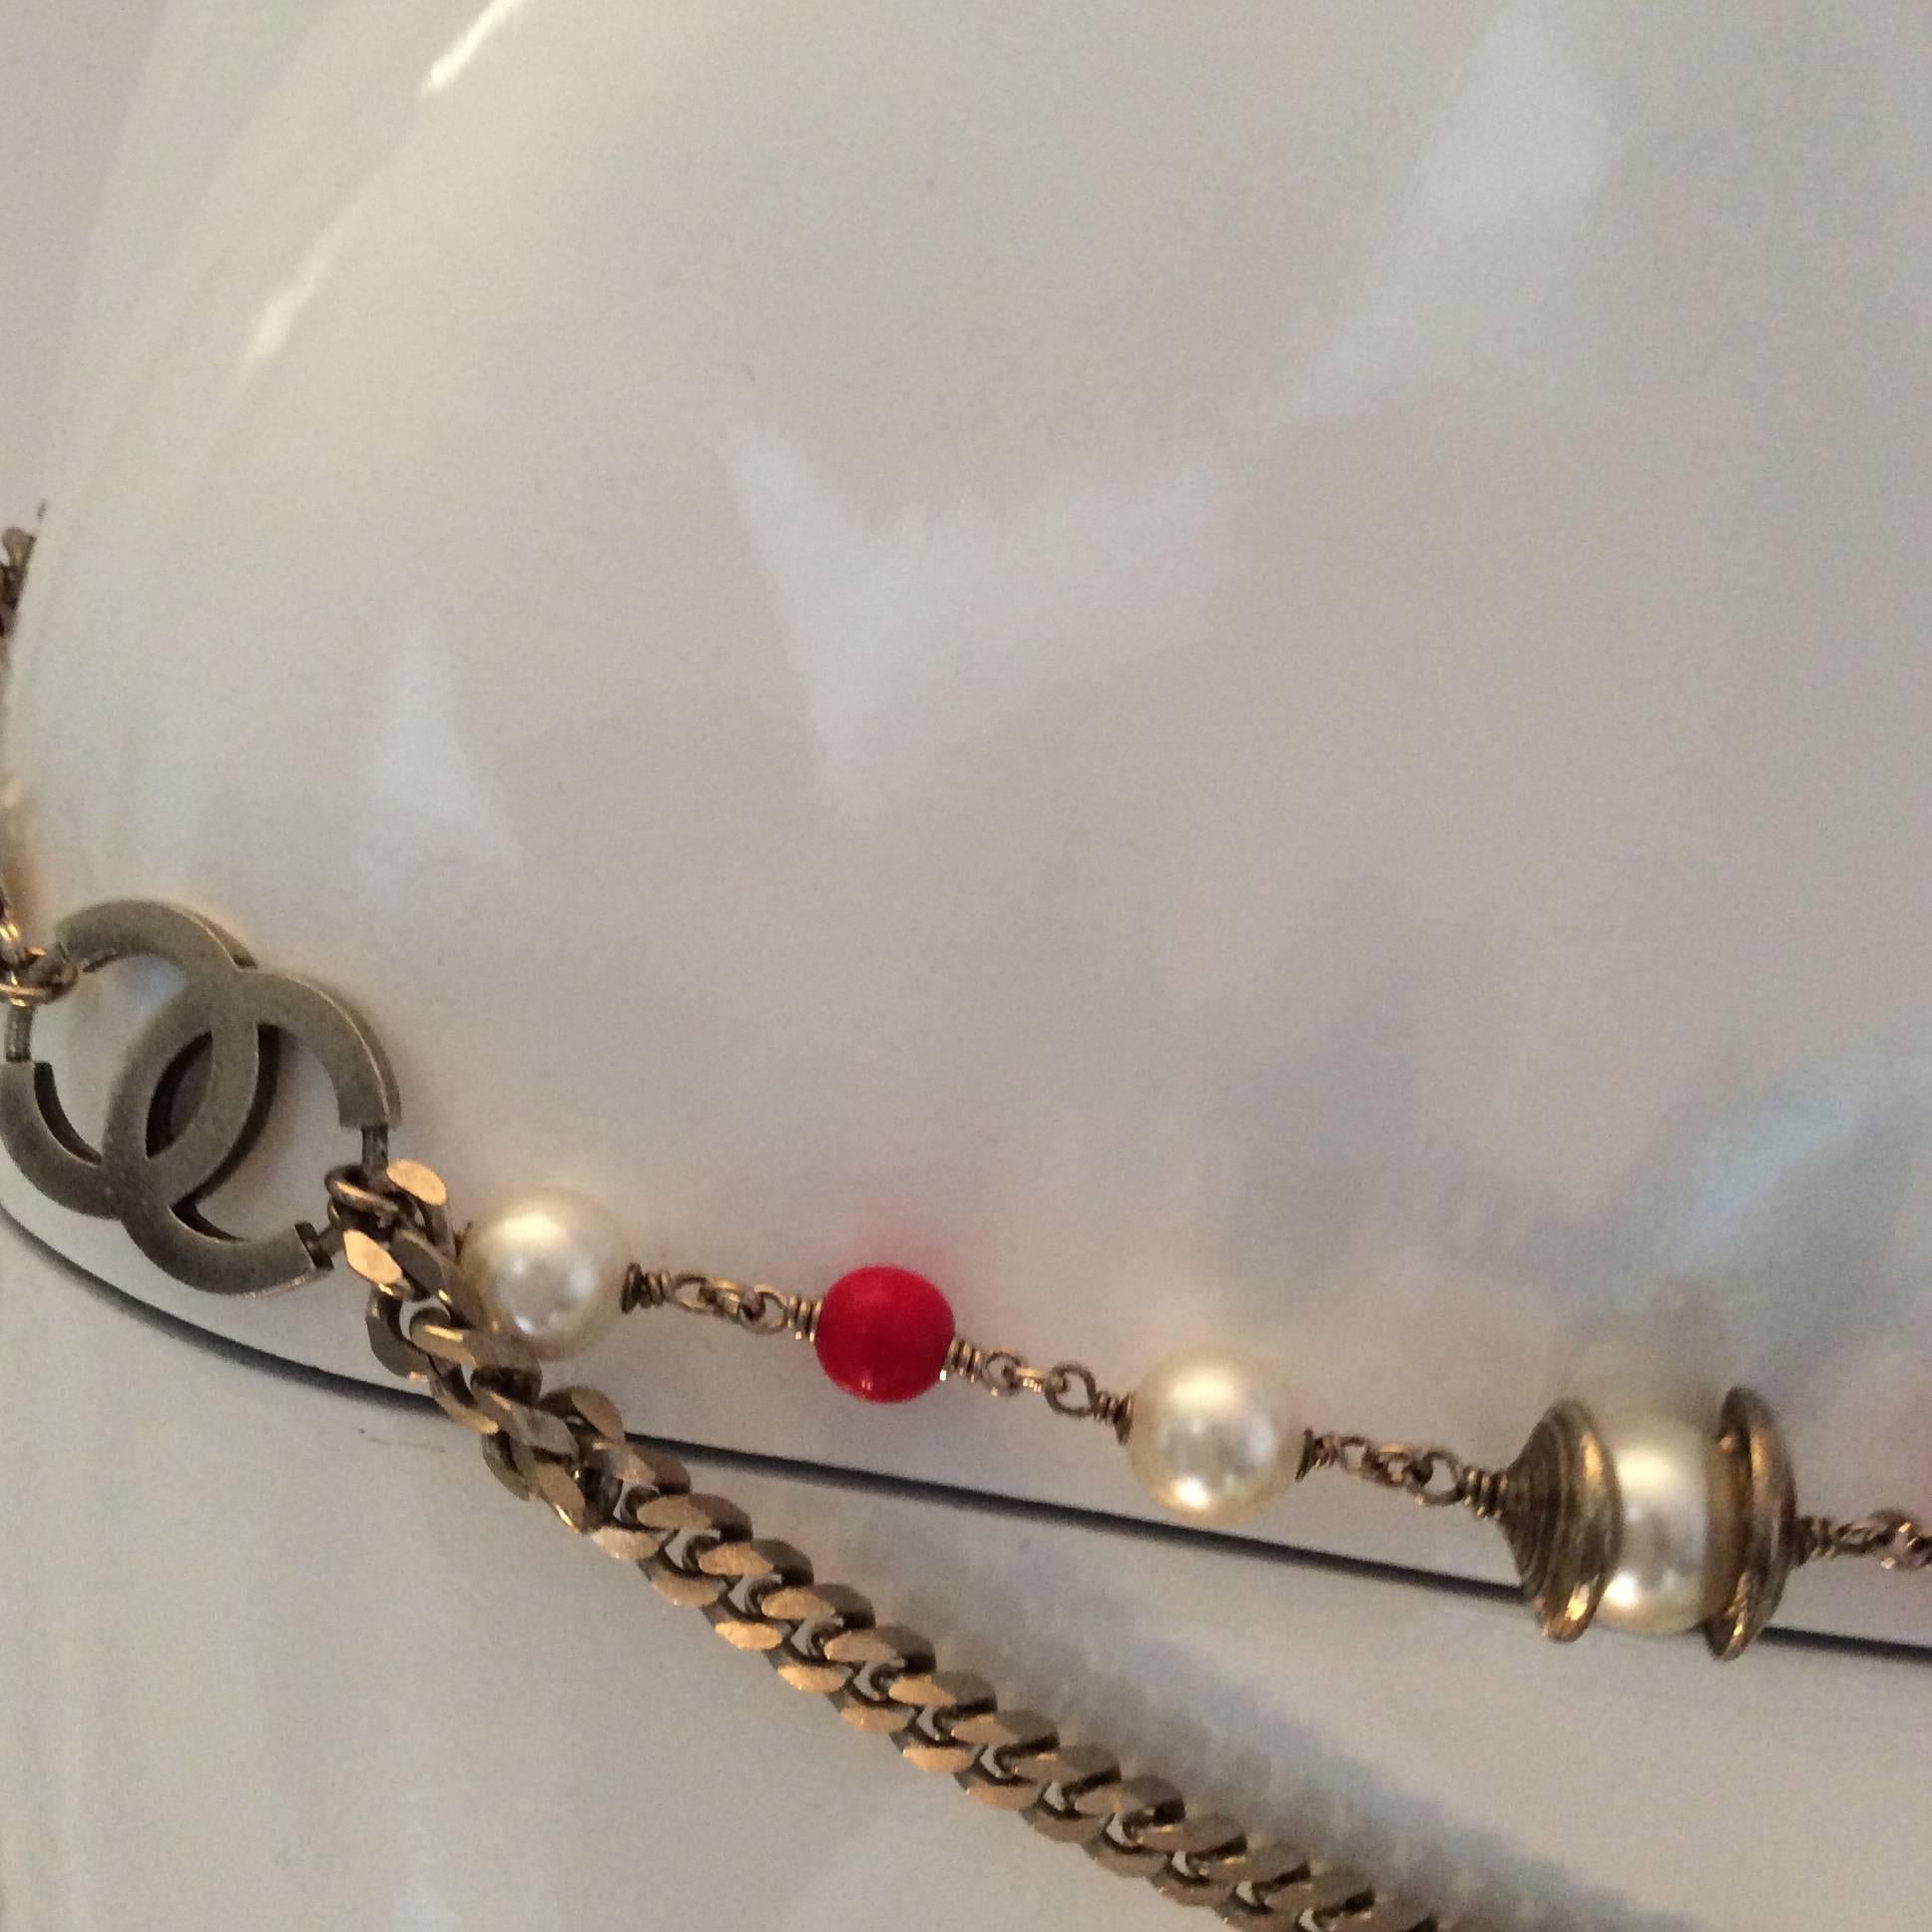 This is a silver tone Chanel belt which can also double as a necklace. I have never even seen one similar to it. It is signed '05 C. The belt / necklace comprises 2 CC emblems that are silver tone and are connected by a string of pearl and red